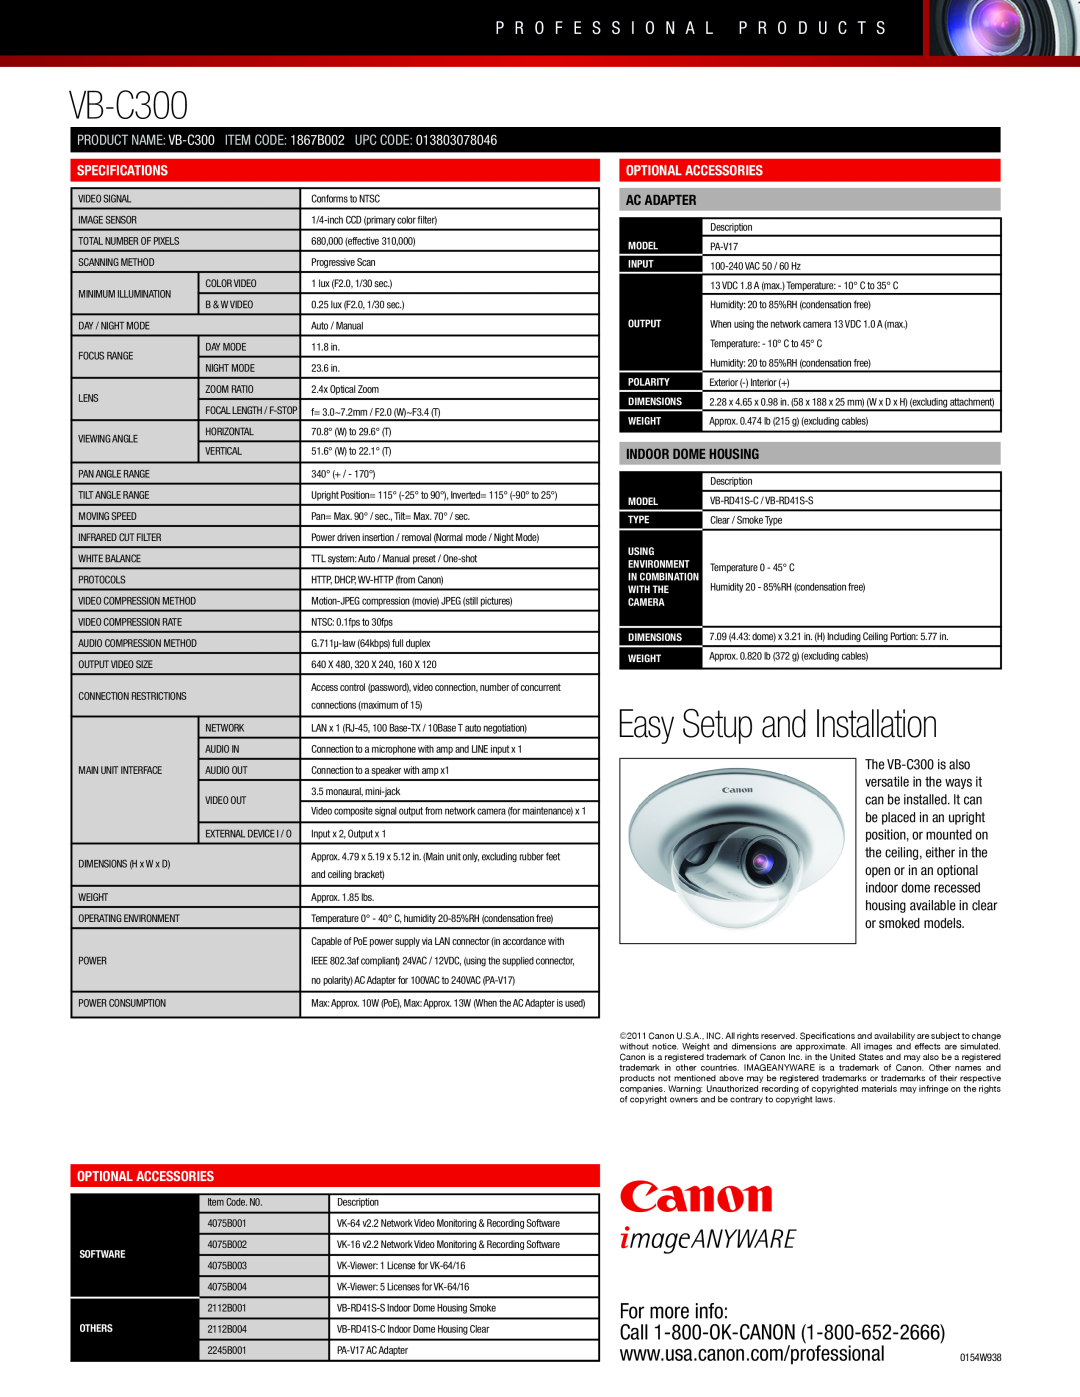 Canon VB-C300 Easy Setup and Installation, P R O F E S S I O N A L P R O D U C T S, Specifications, Optional Accessories 